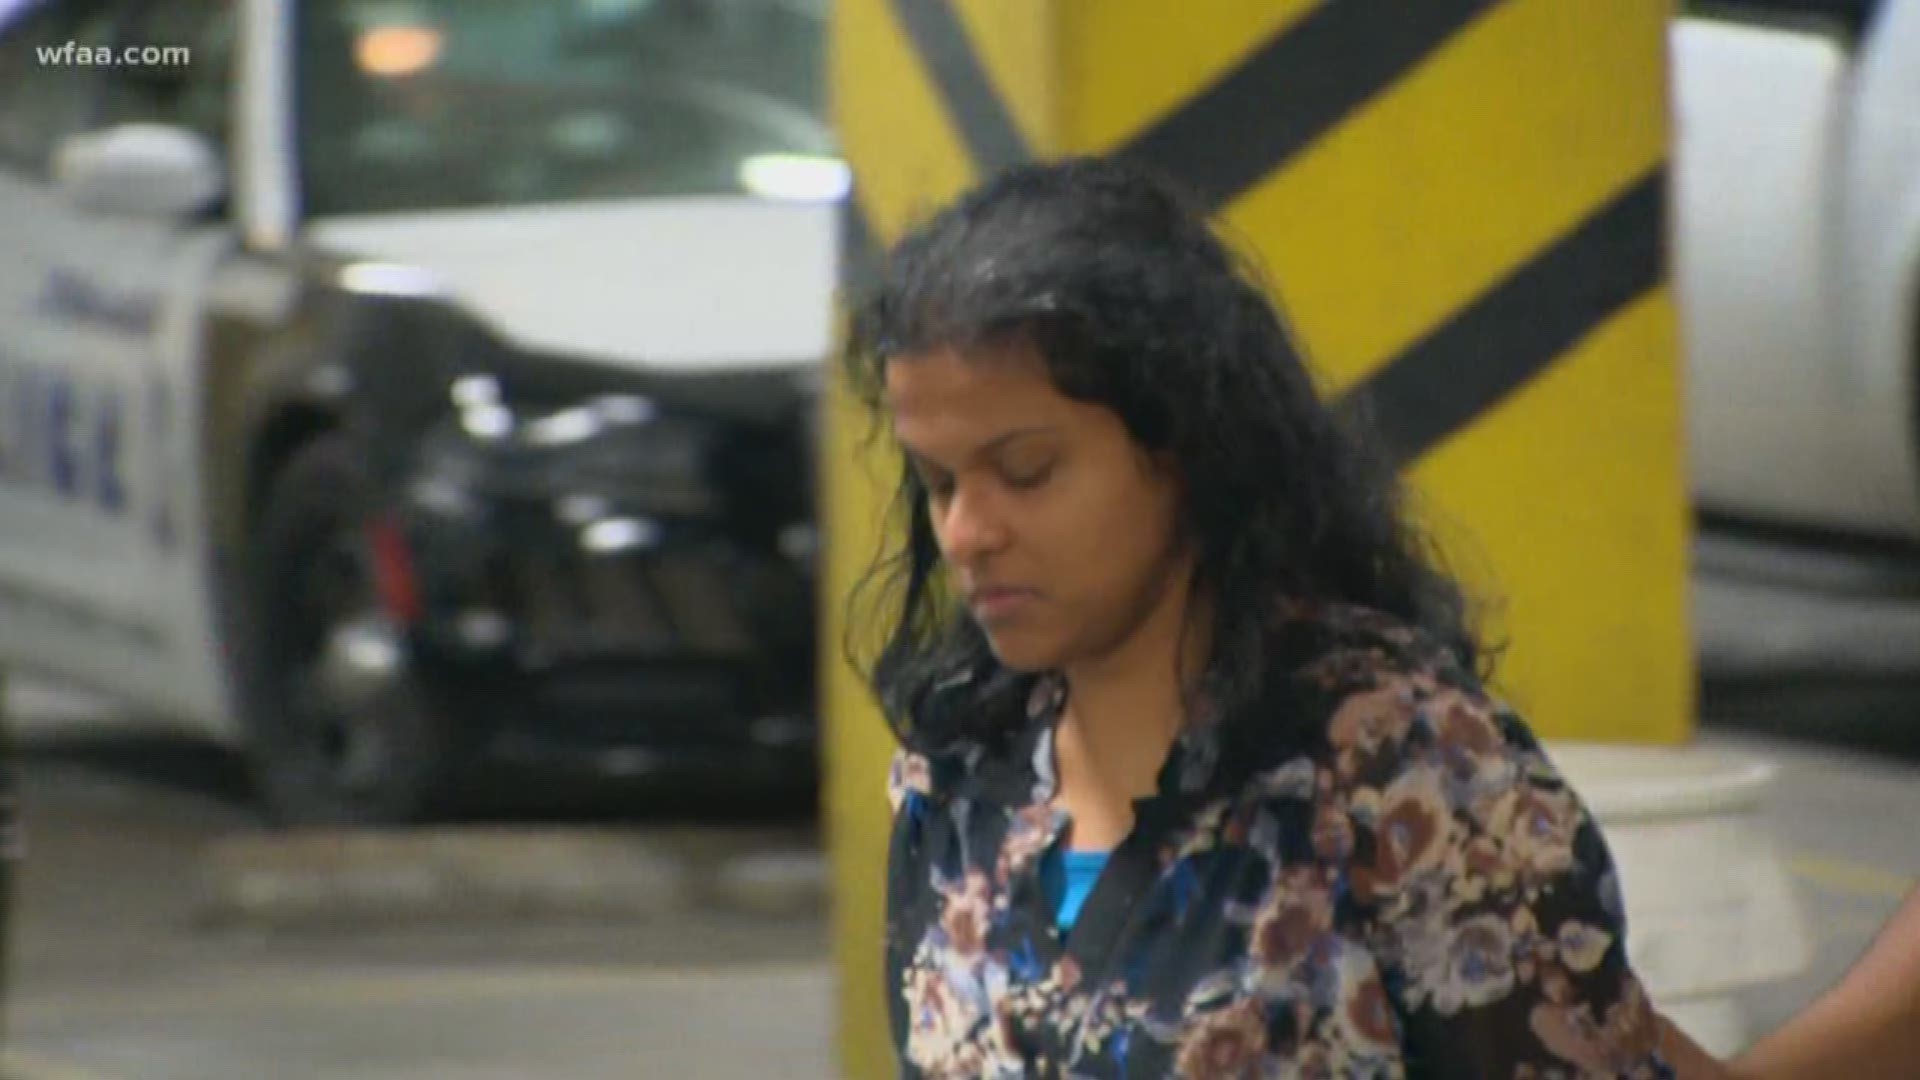 CPS hurdles ahead after parents' arrest in Sherin Mathews case